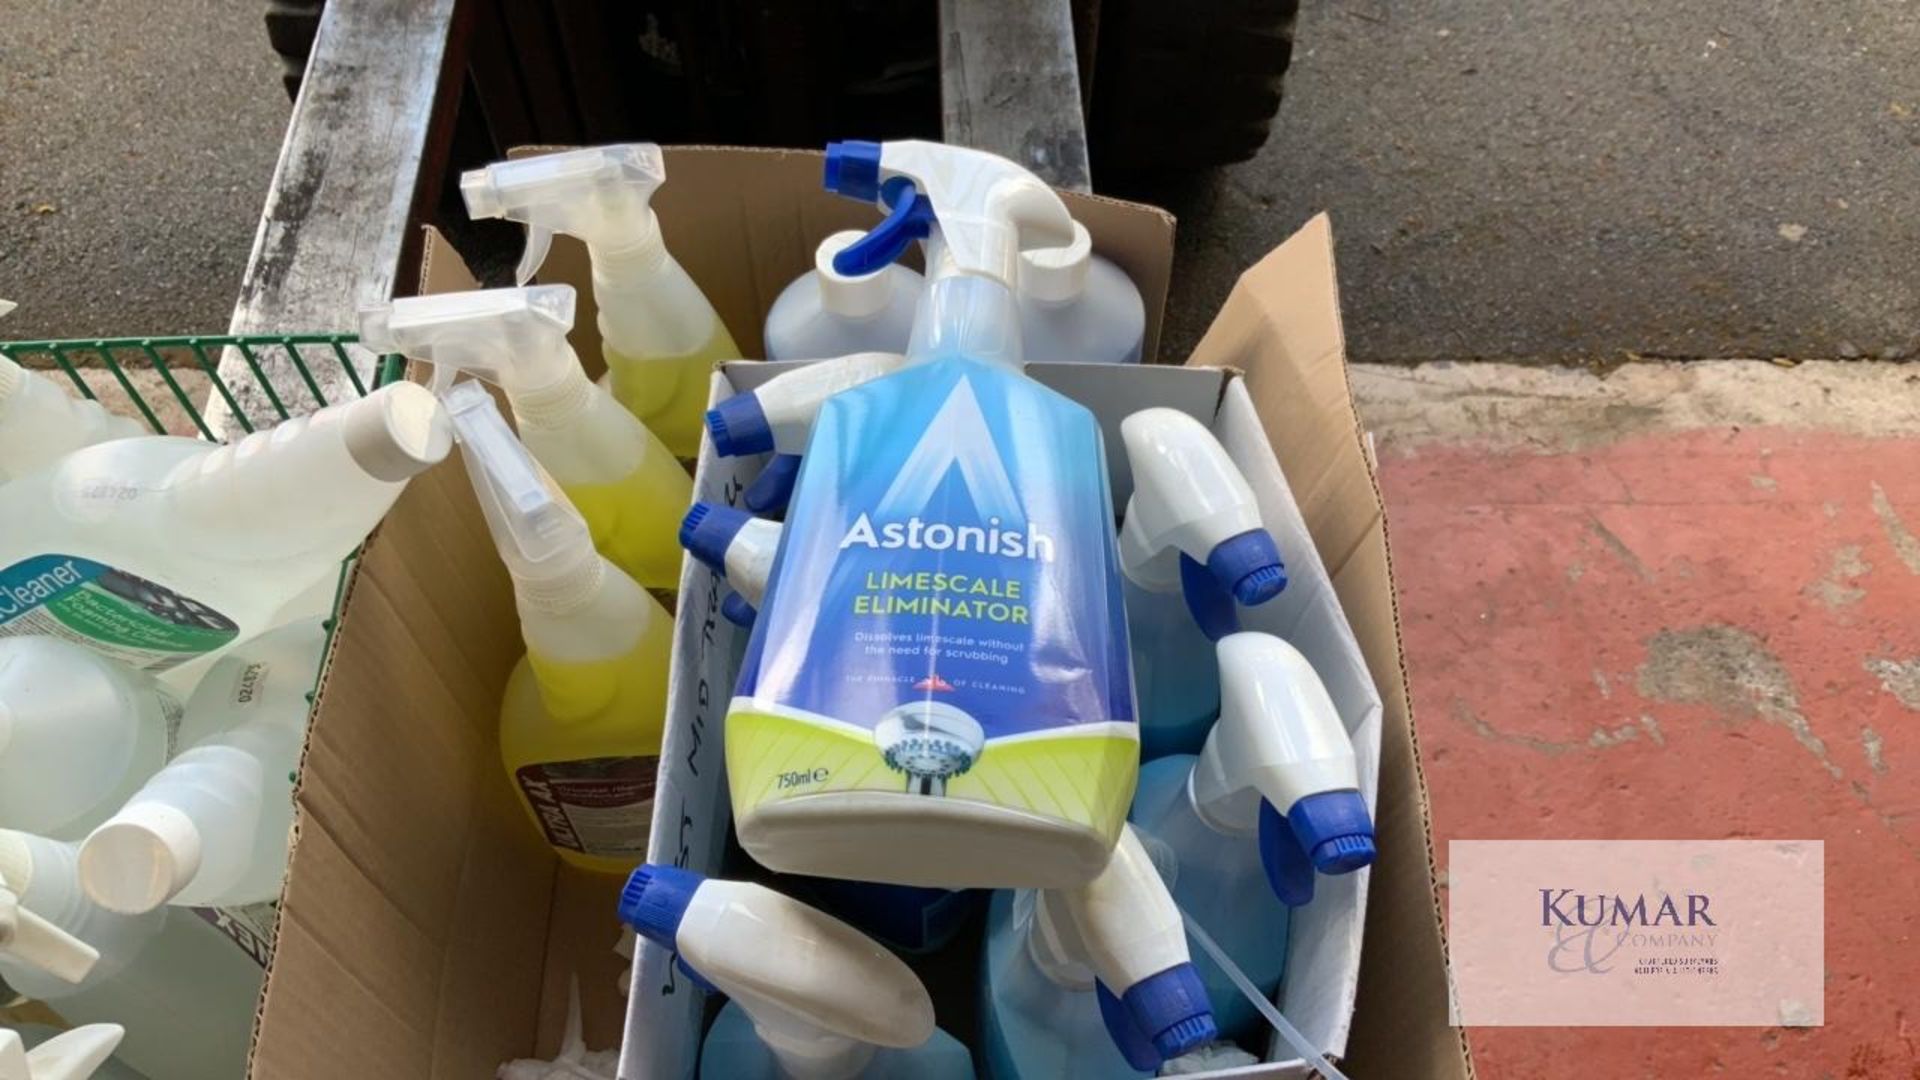 Mixed Lot of Cleaning Materials and Sprays To Include Disinfectants, Limescale Remover, Foaming - Image 3 of 8